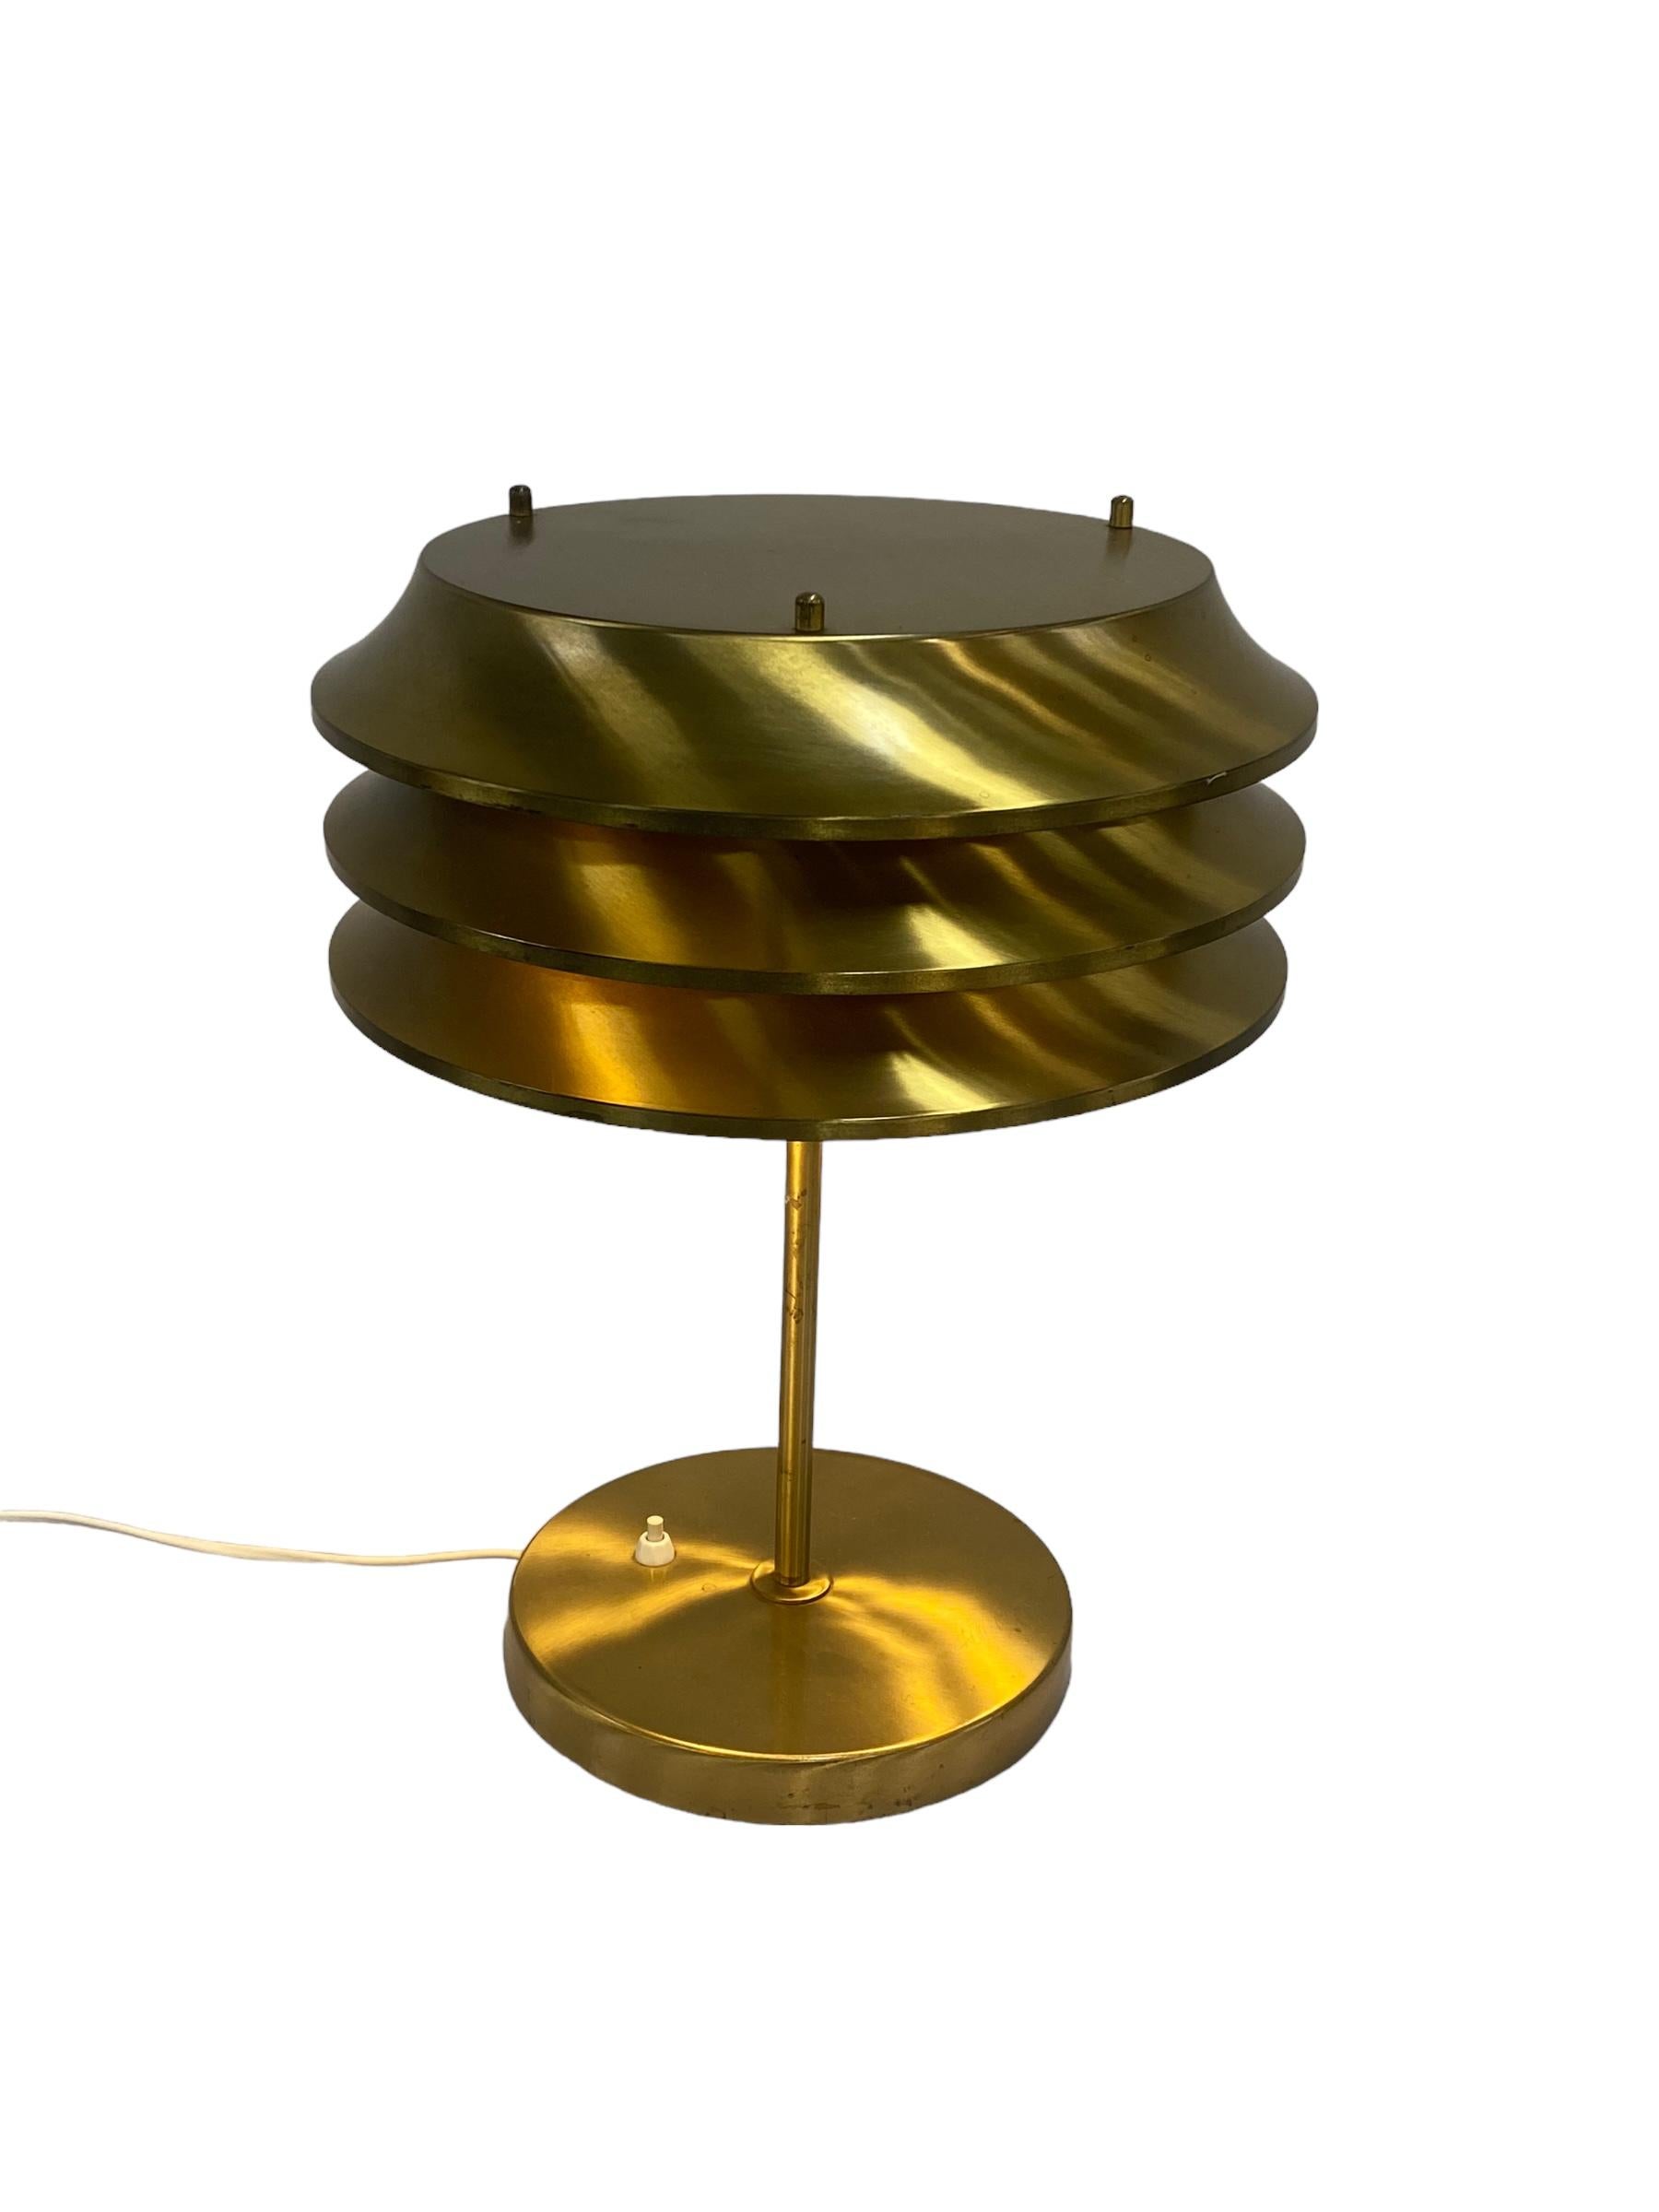 This lamp was designed by Kai Ruokonen, originally for the Vaakuna Hotel in Helsinki in the 1970s. The same model was also used later in the Palace Hotel Helsinki. A very simple yet elegant heavy duty lamp in full brass with a beautiful patina.